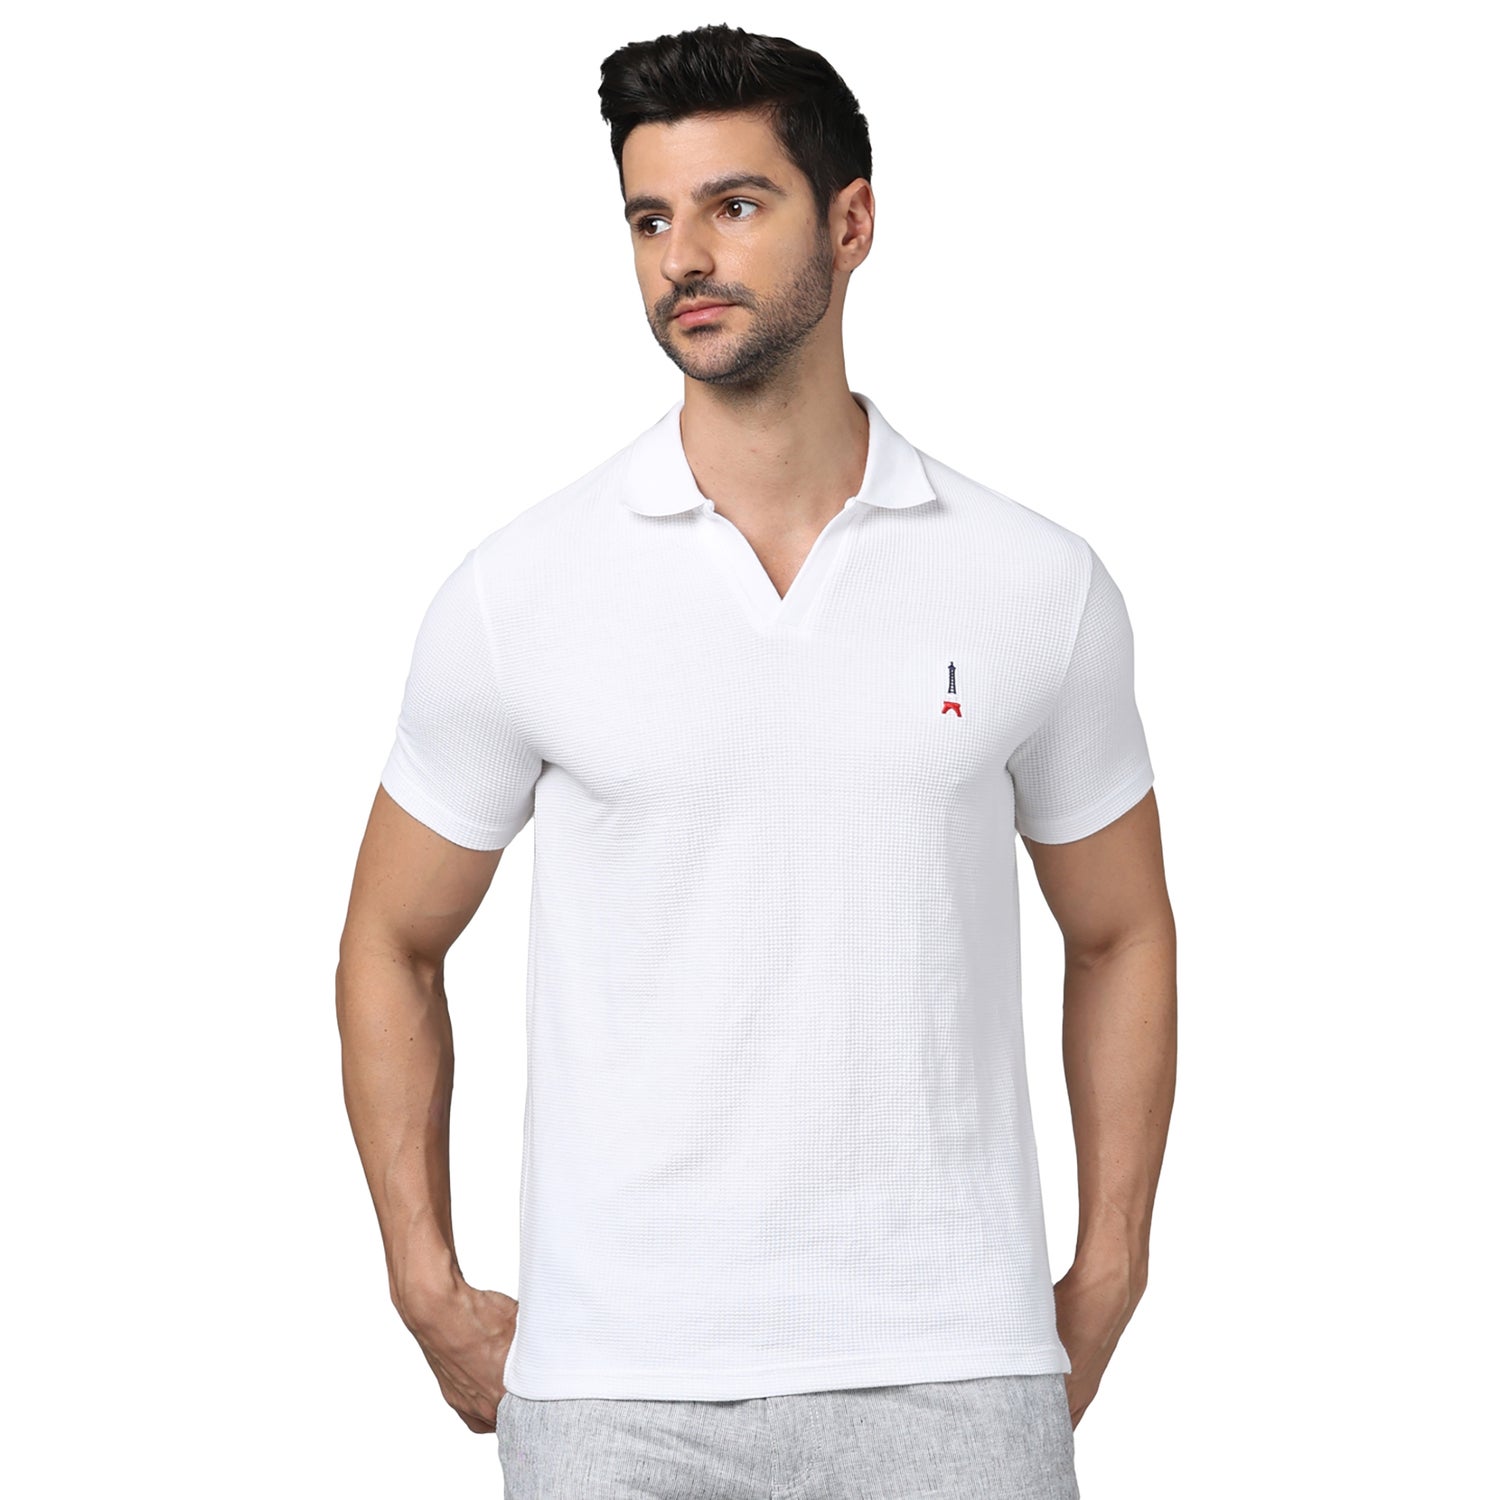 Men's White Polo Collar Solid Regular Fit Cotton Basic Polo Tshirts (GEWAFFLE2)